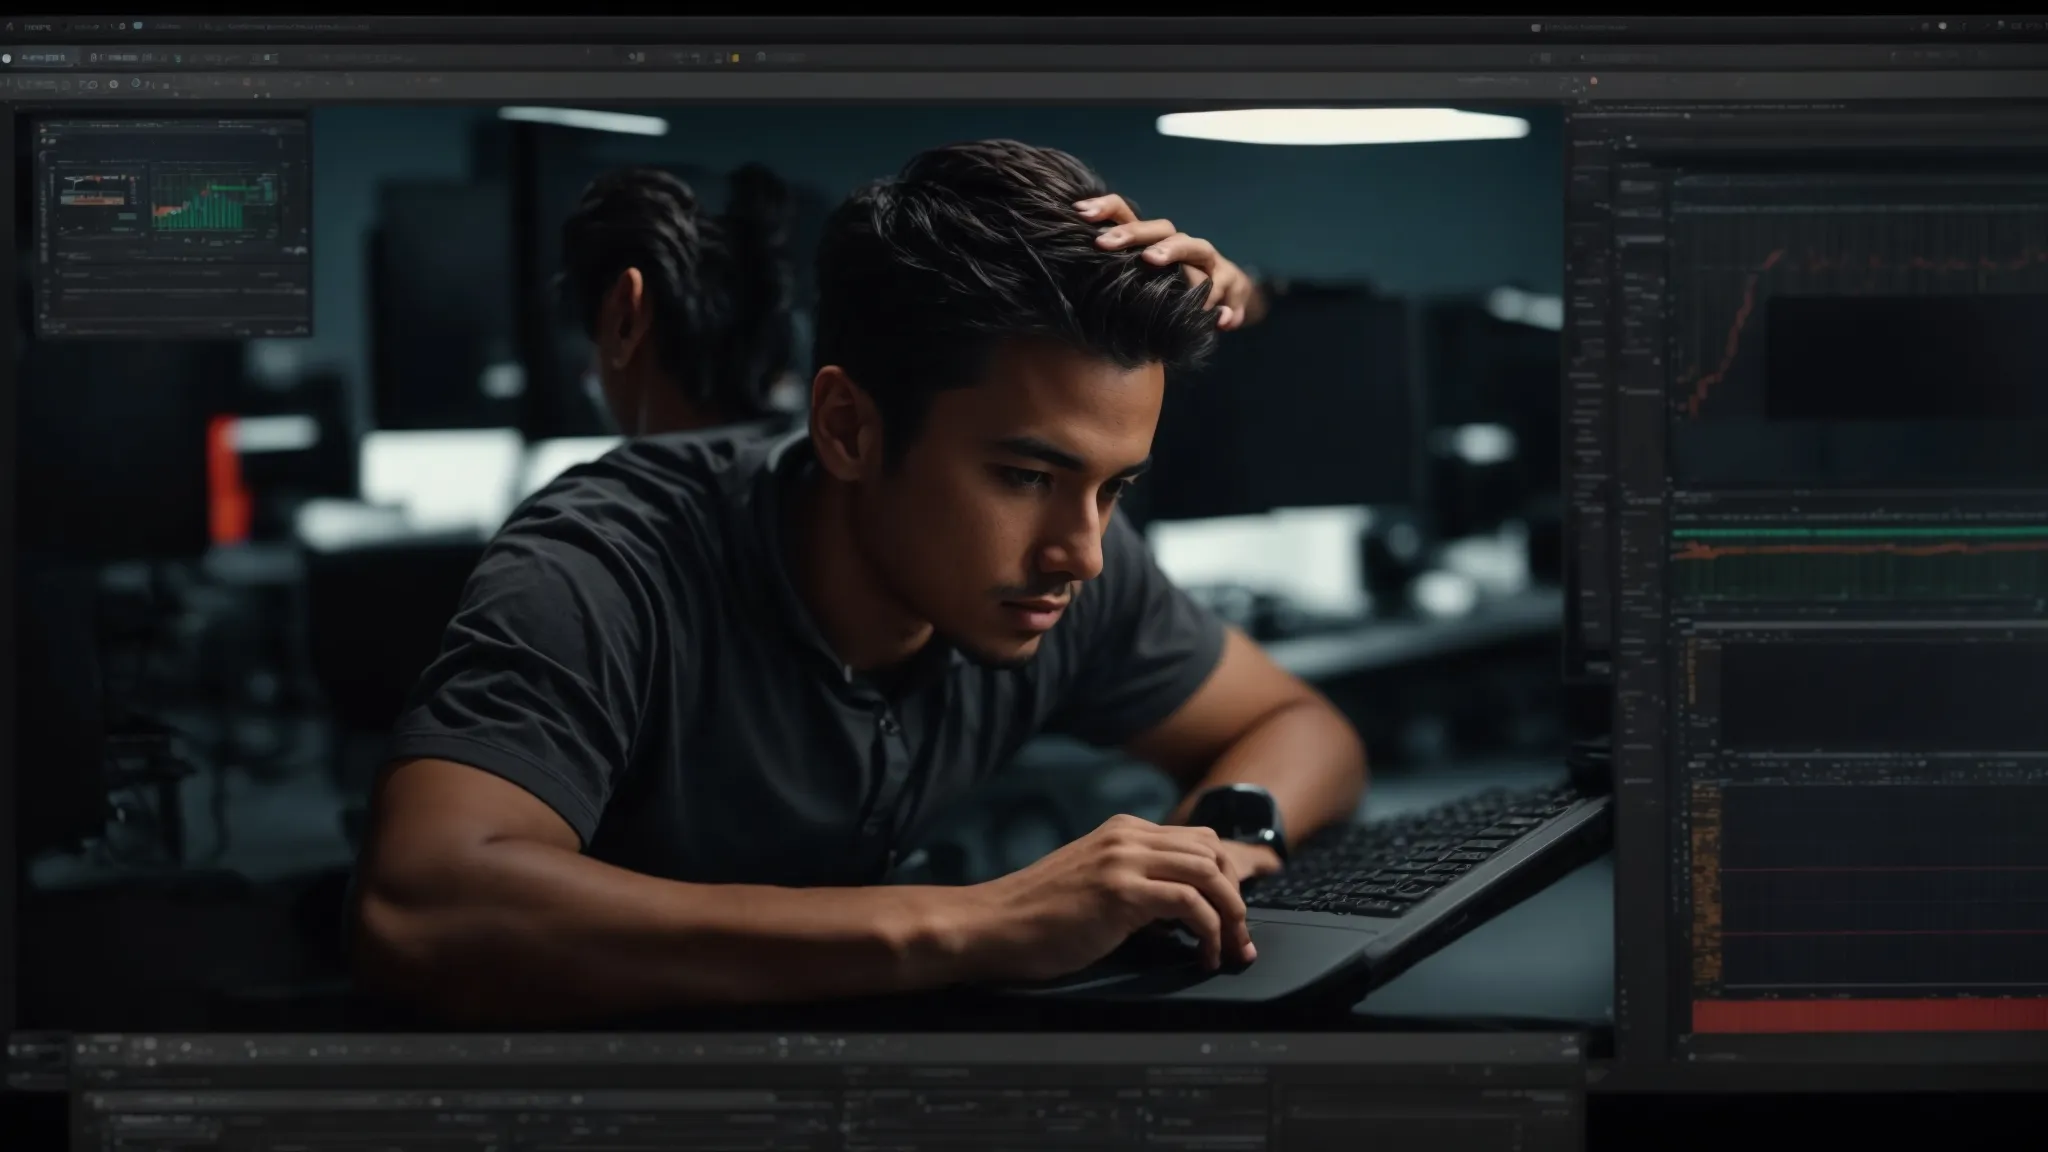 a content creator intently focuses on a large, bright computer screen displaying a video editing software interface with an open subtitles editing panel.